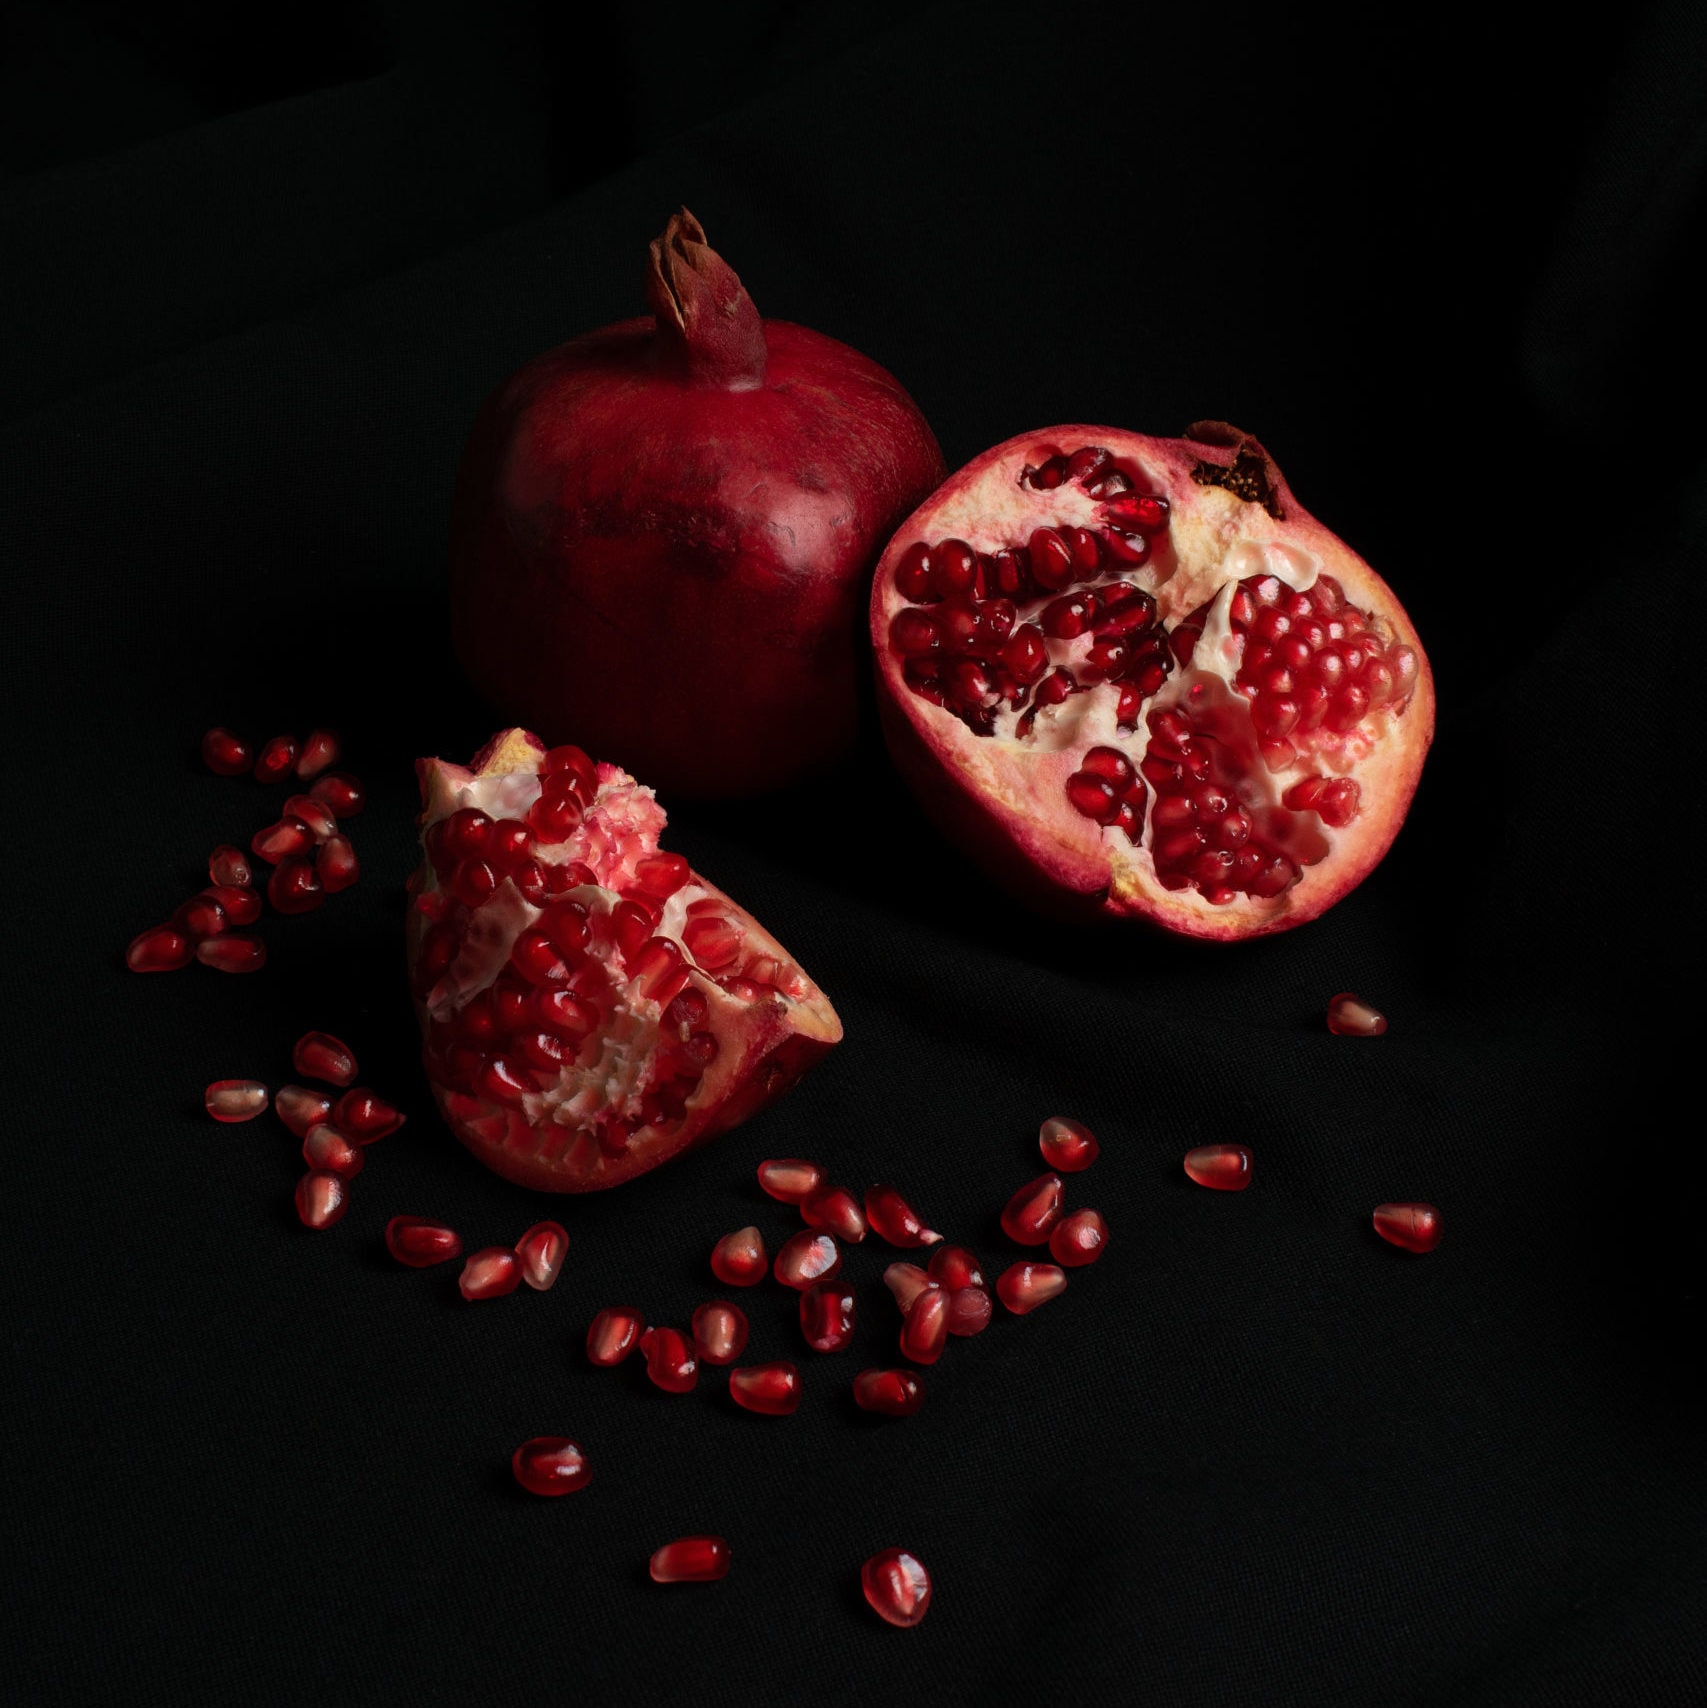 Bright red cut open pomegranate on a black background, with red seeds spilling out around it